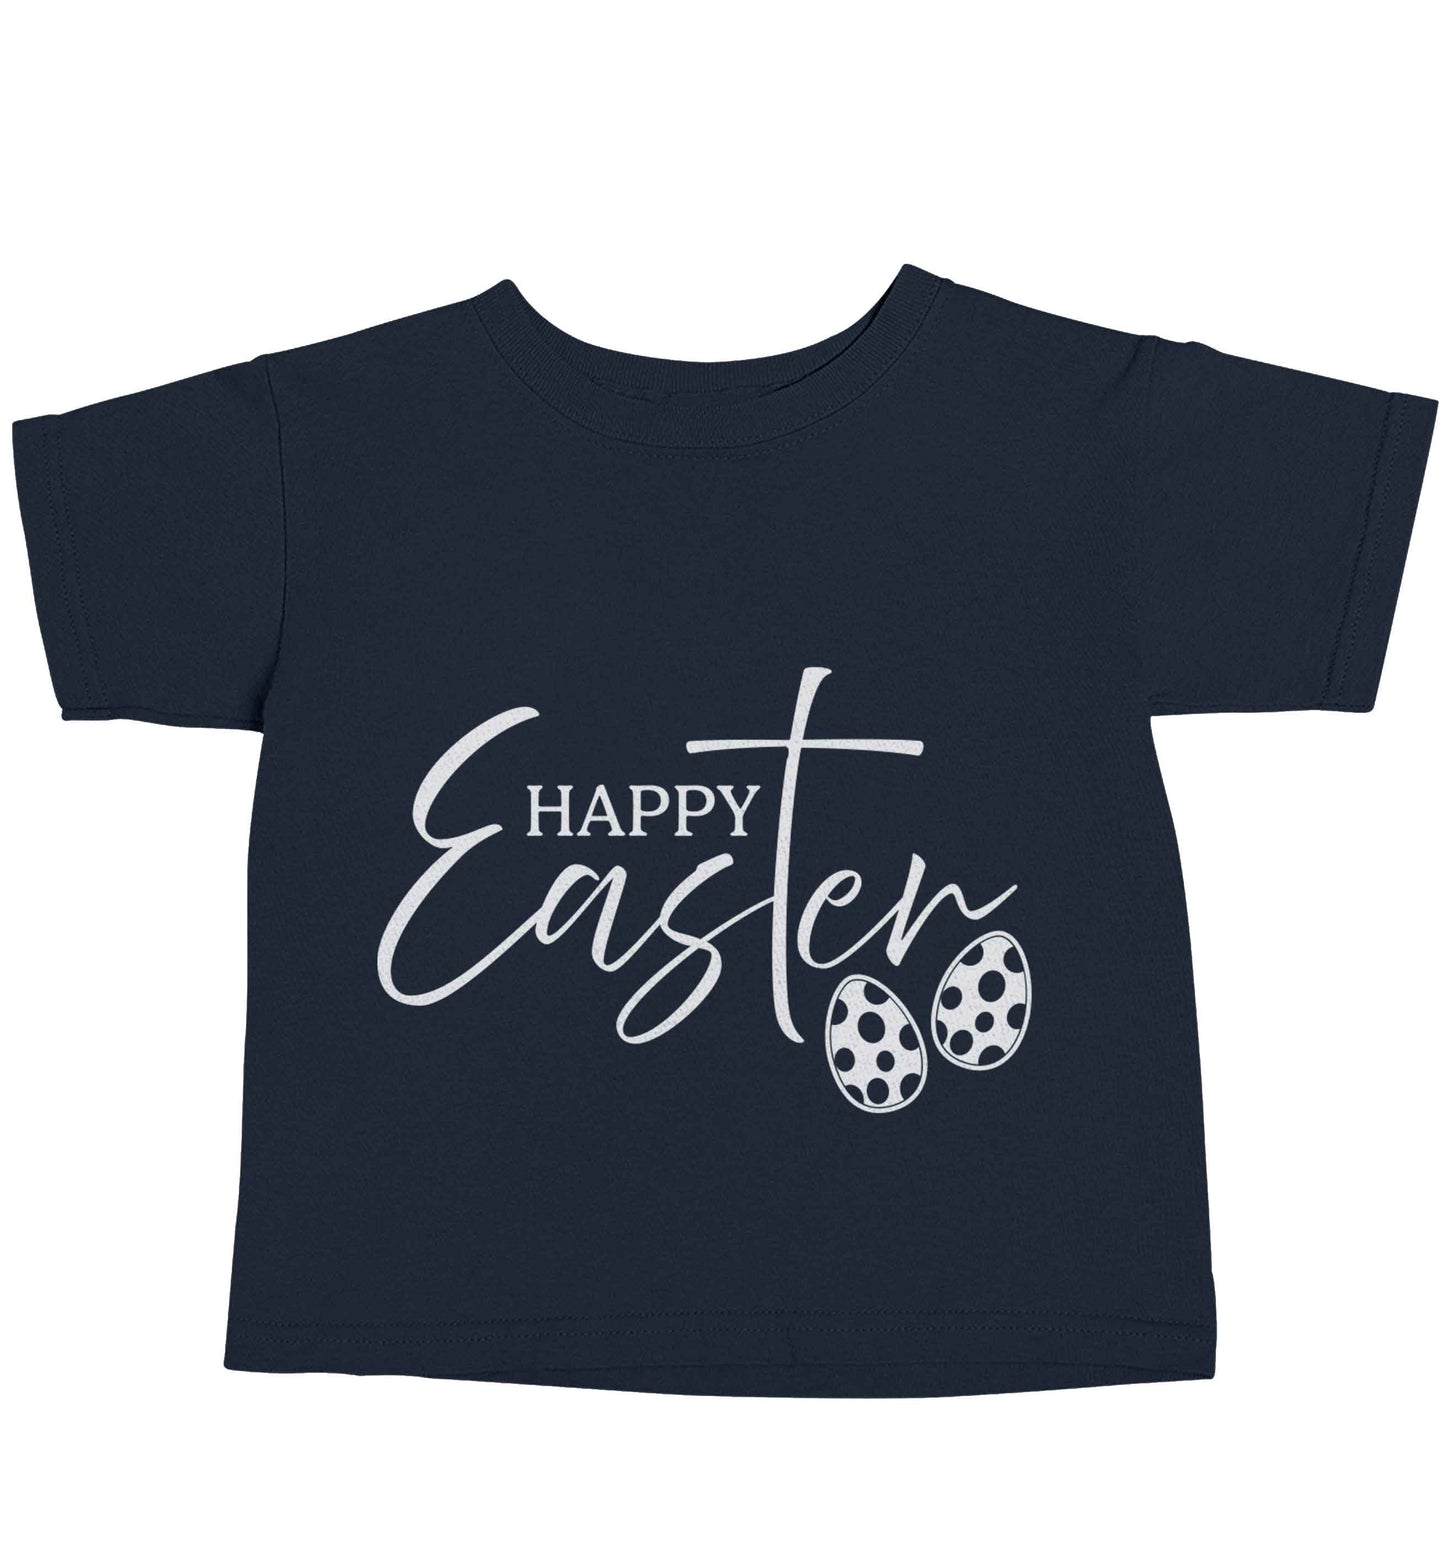 Happy Easter navy baby toddler Tshirt 2 Years